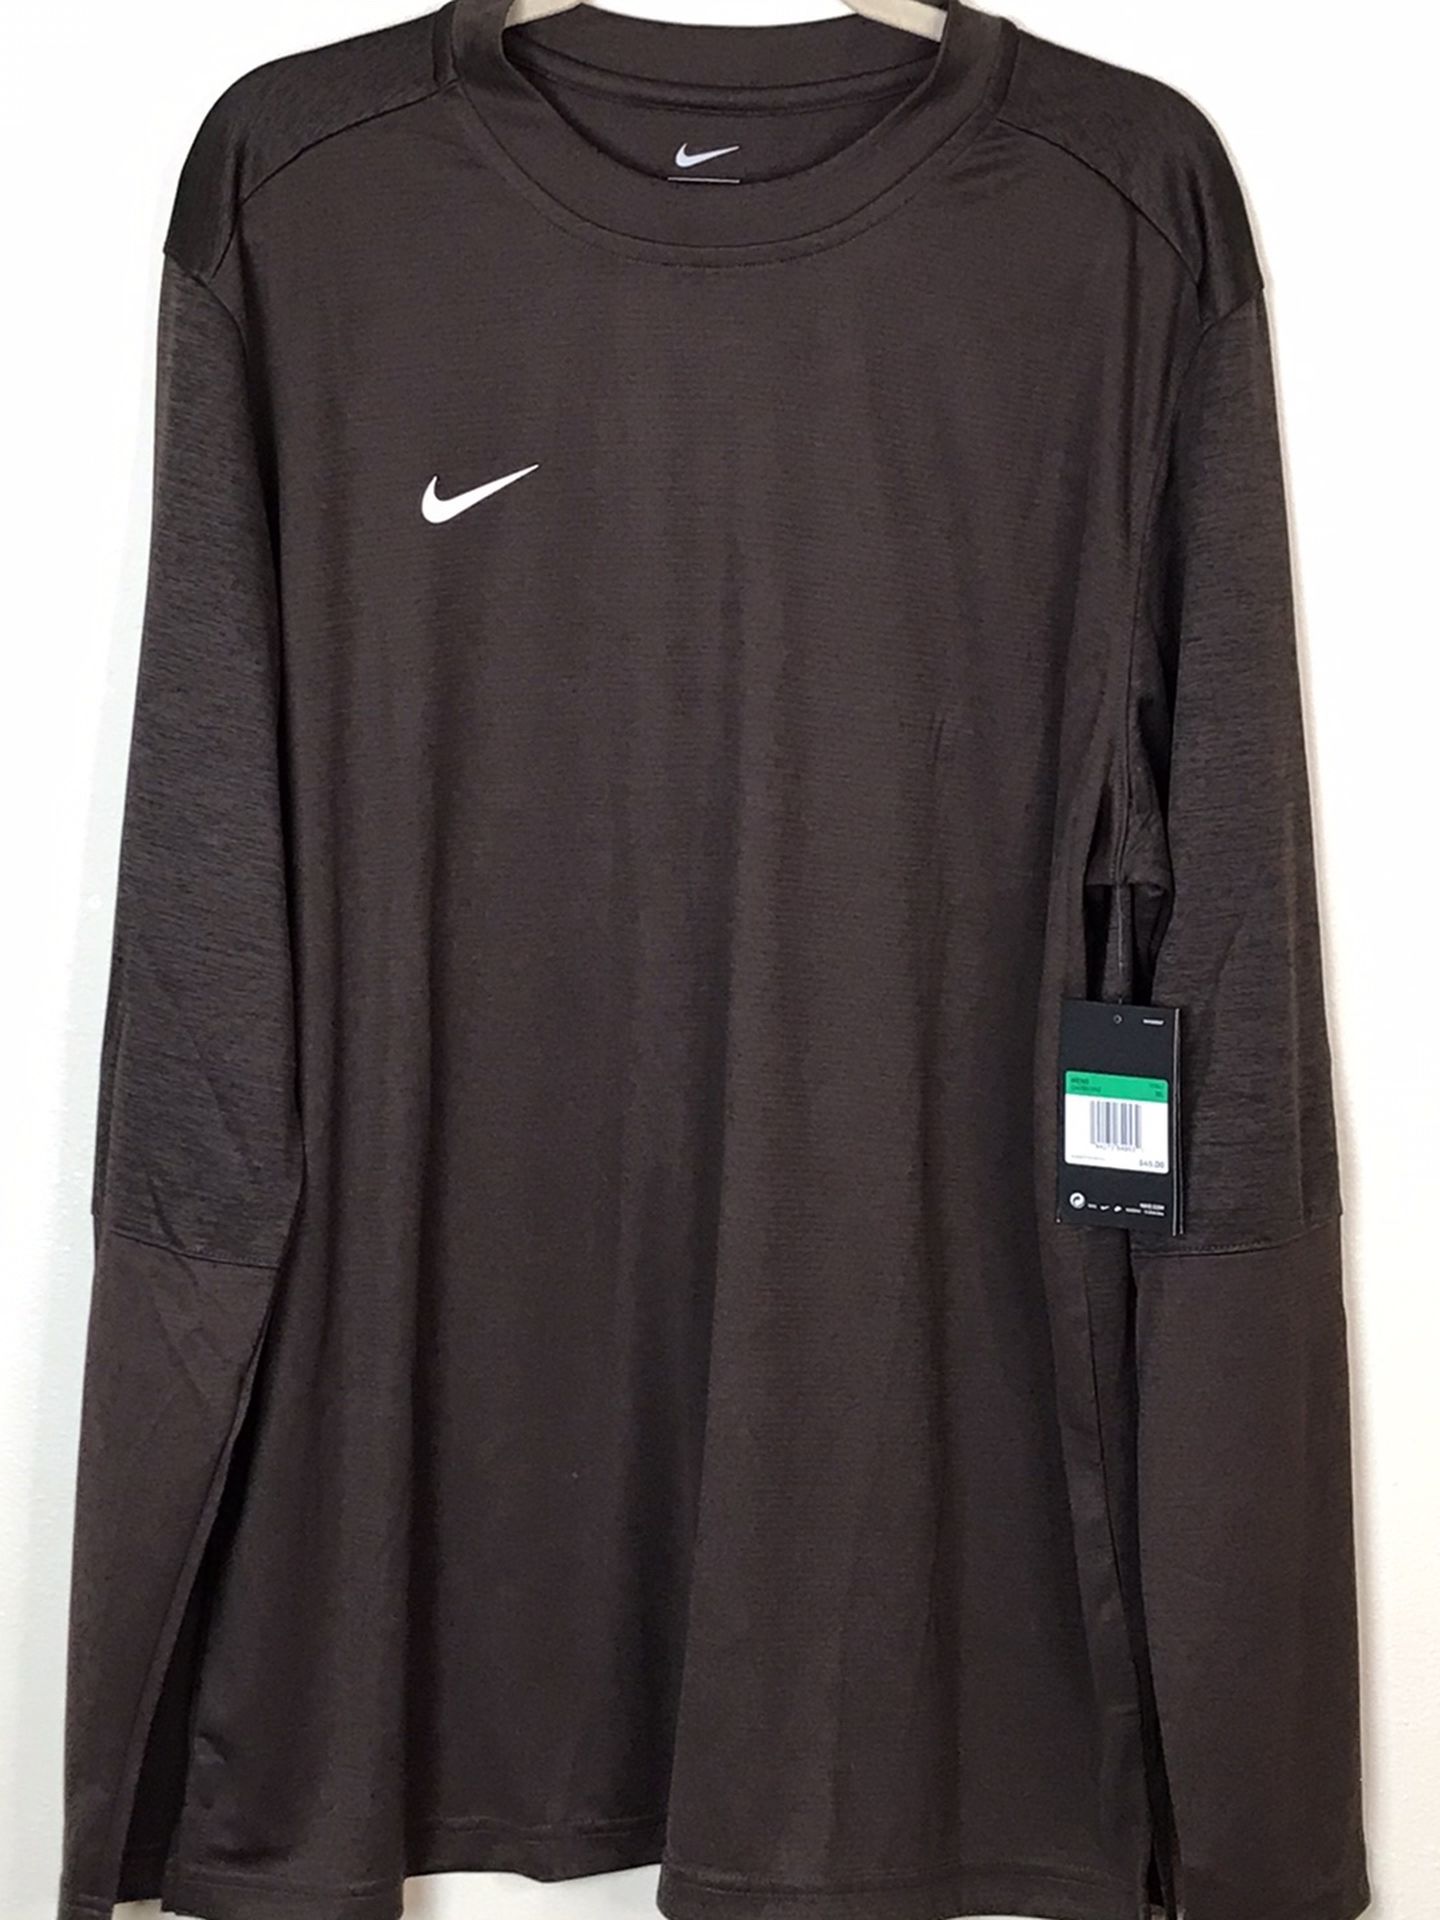 Nike Football Training Shirt Sideline Long Sleeve Brown CI4760-249 Mens XL New with tags